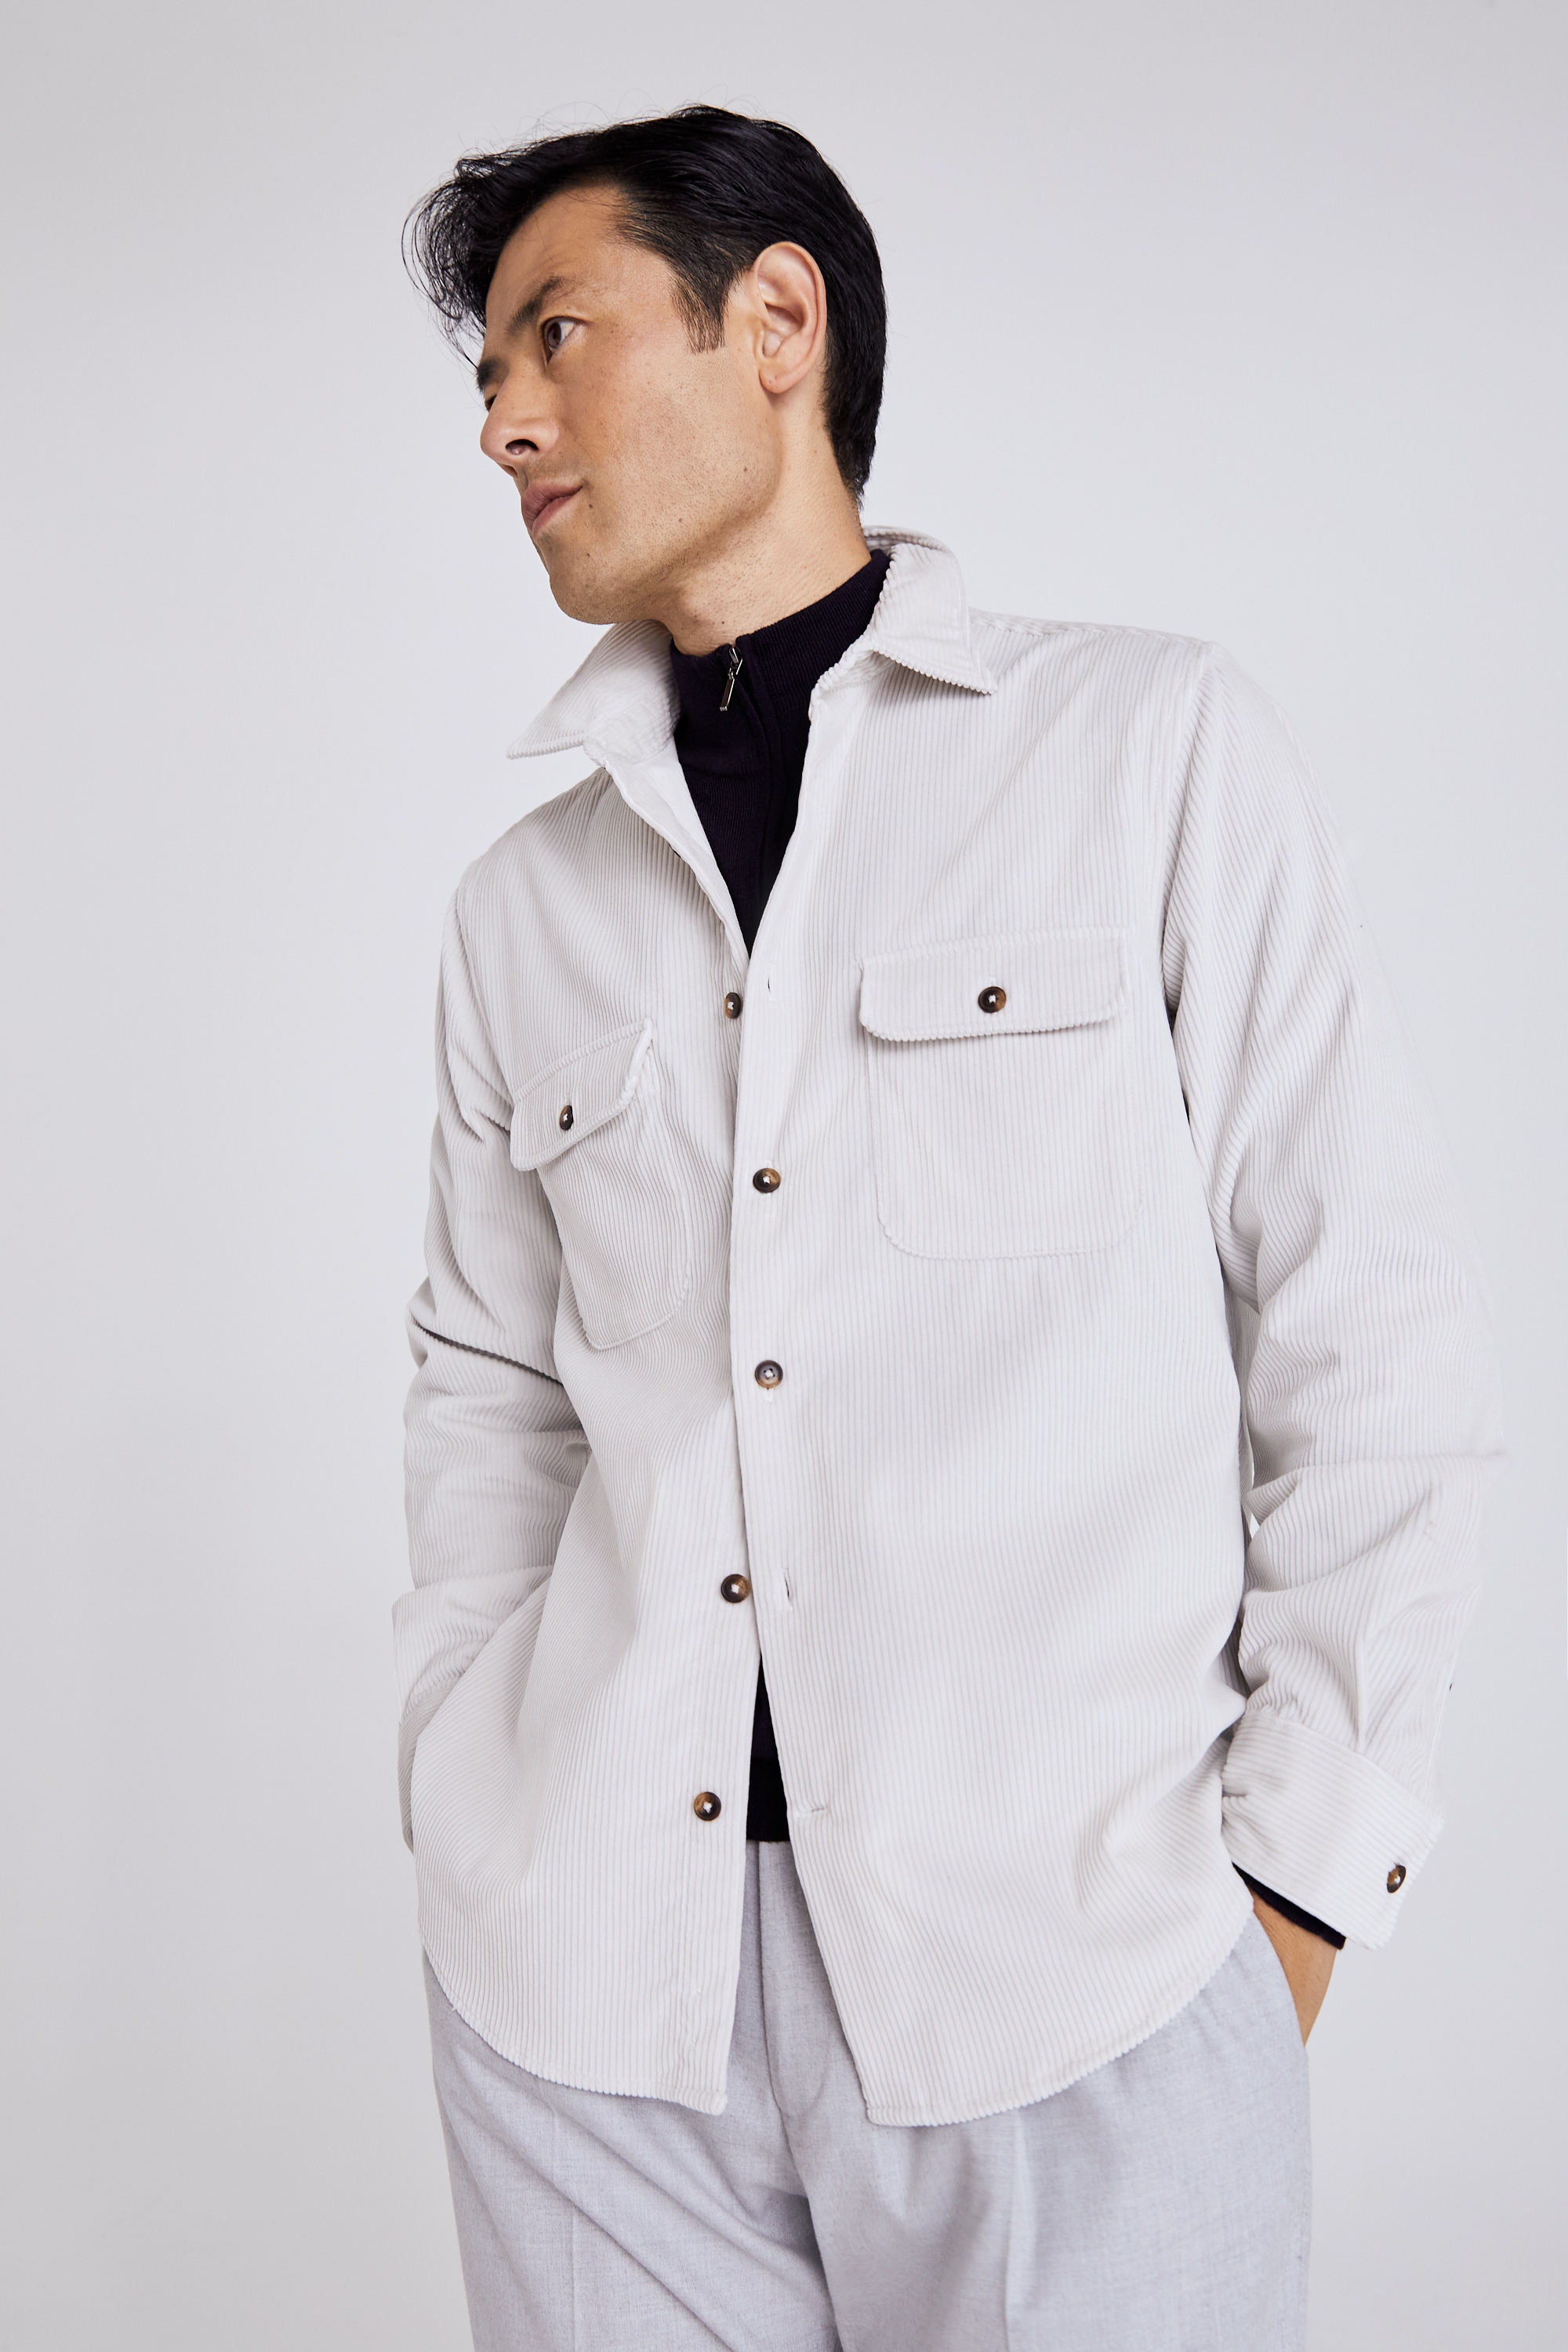 Off-White Cord Overshirt | Buy Online at Moss